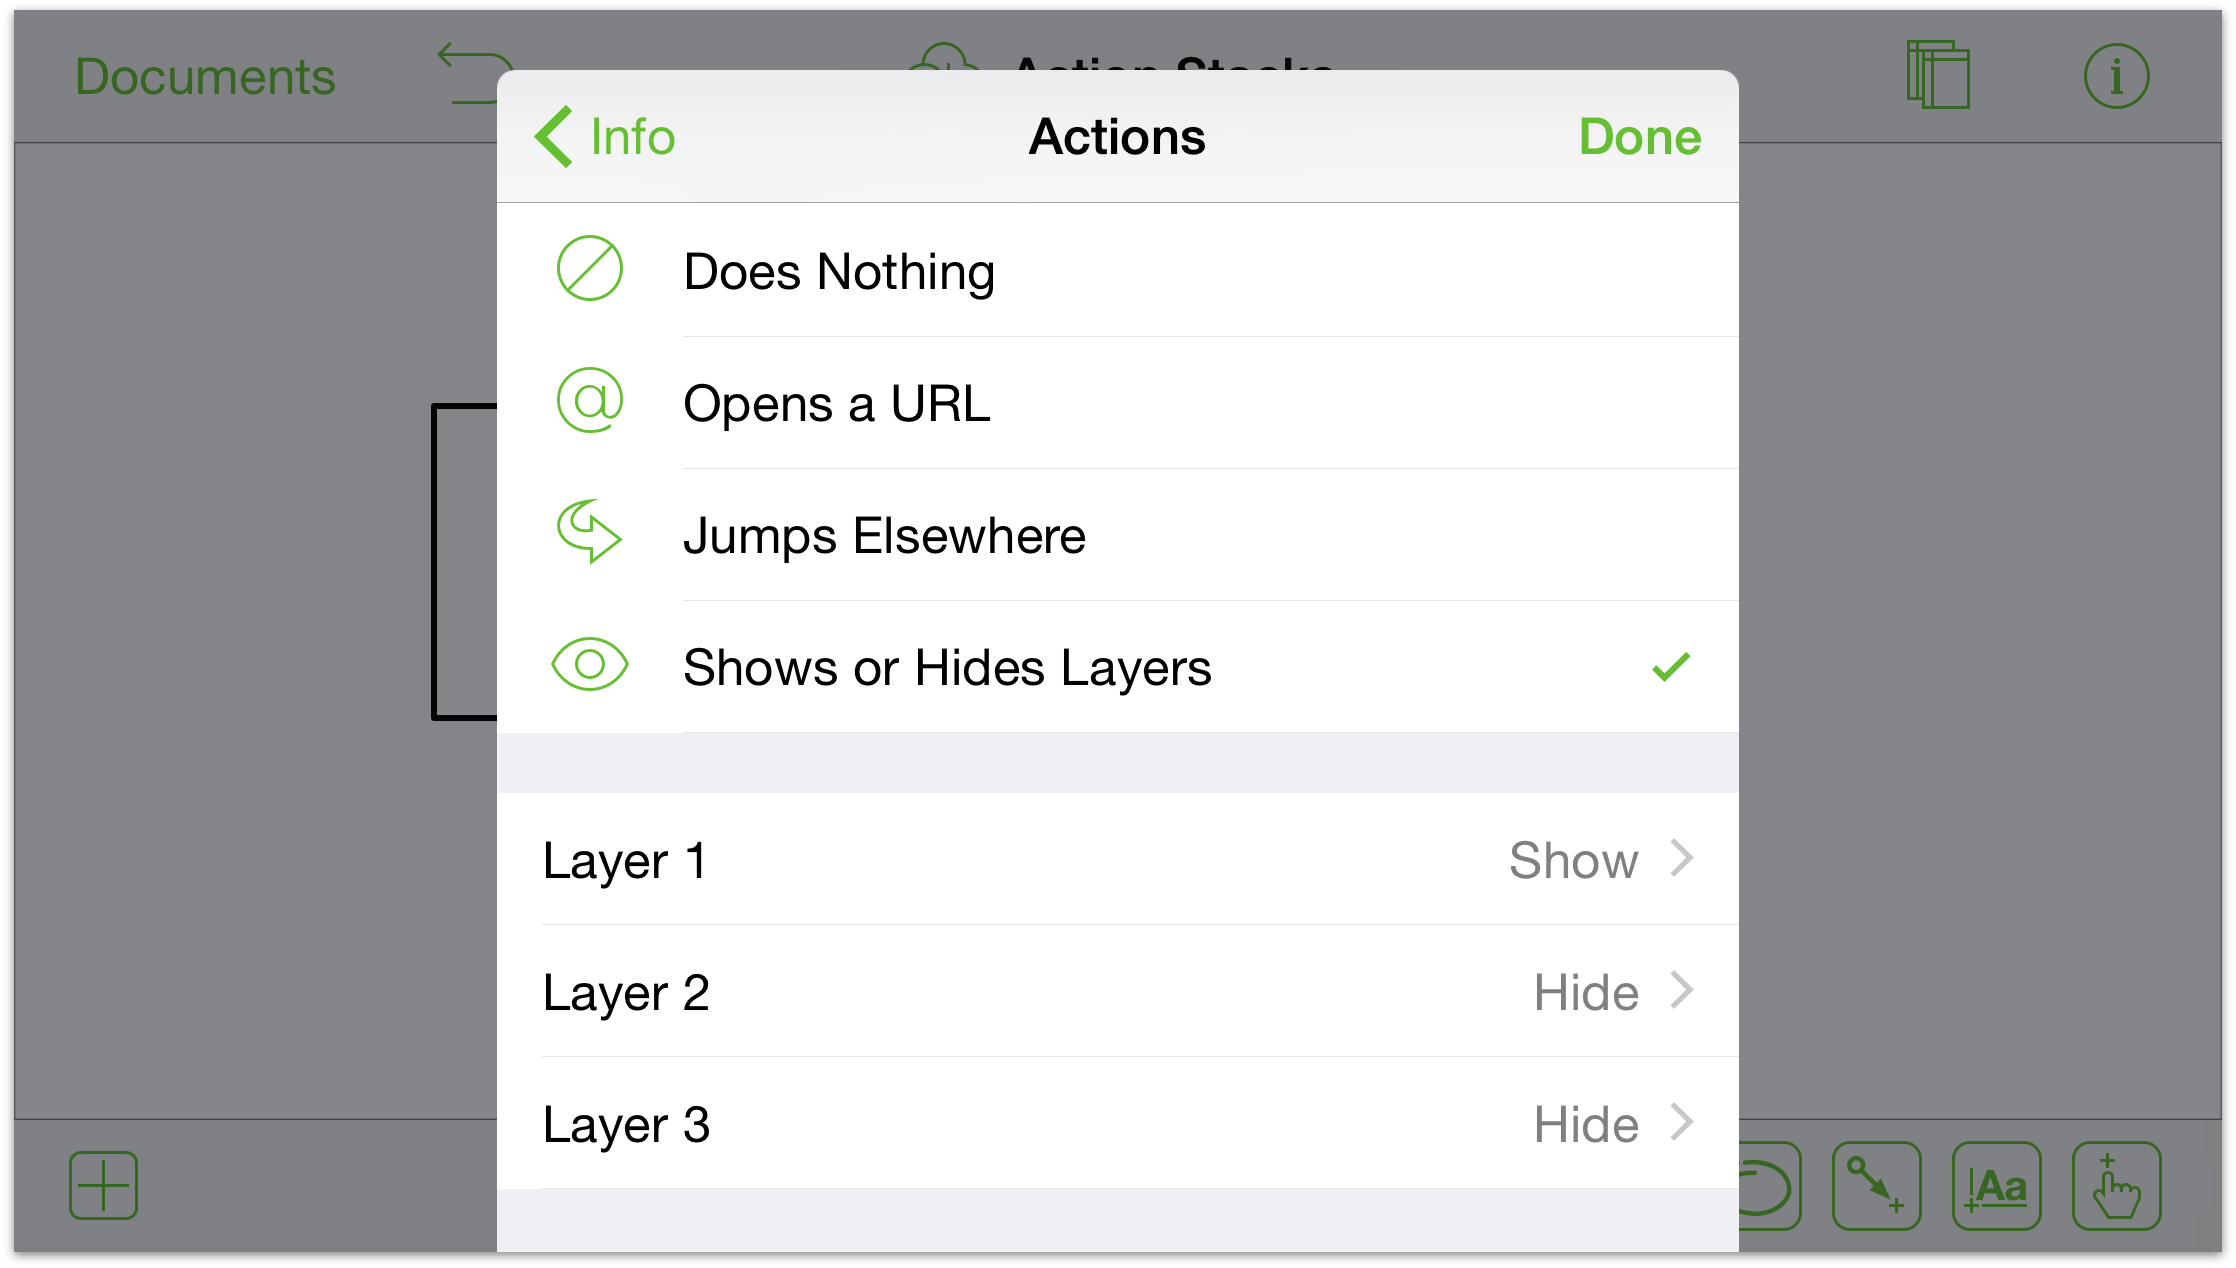 The actions for Layer 3